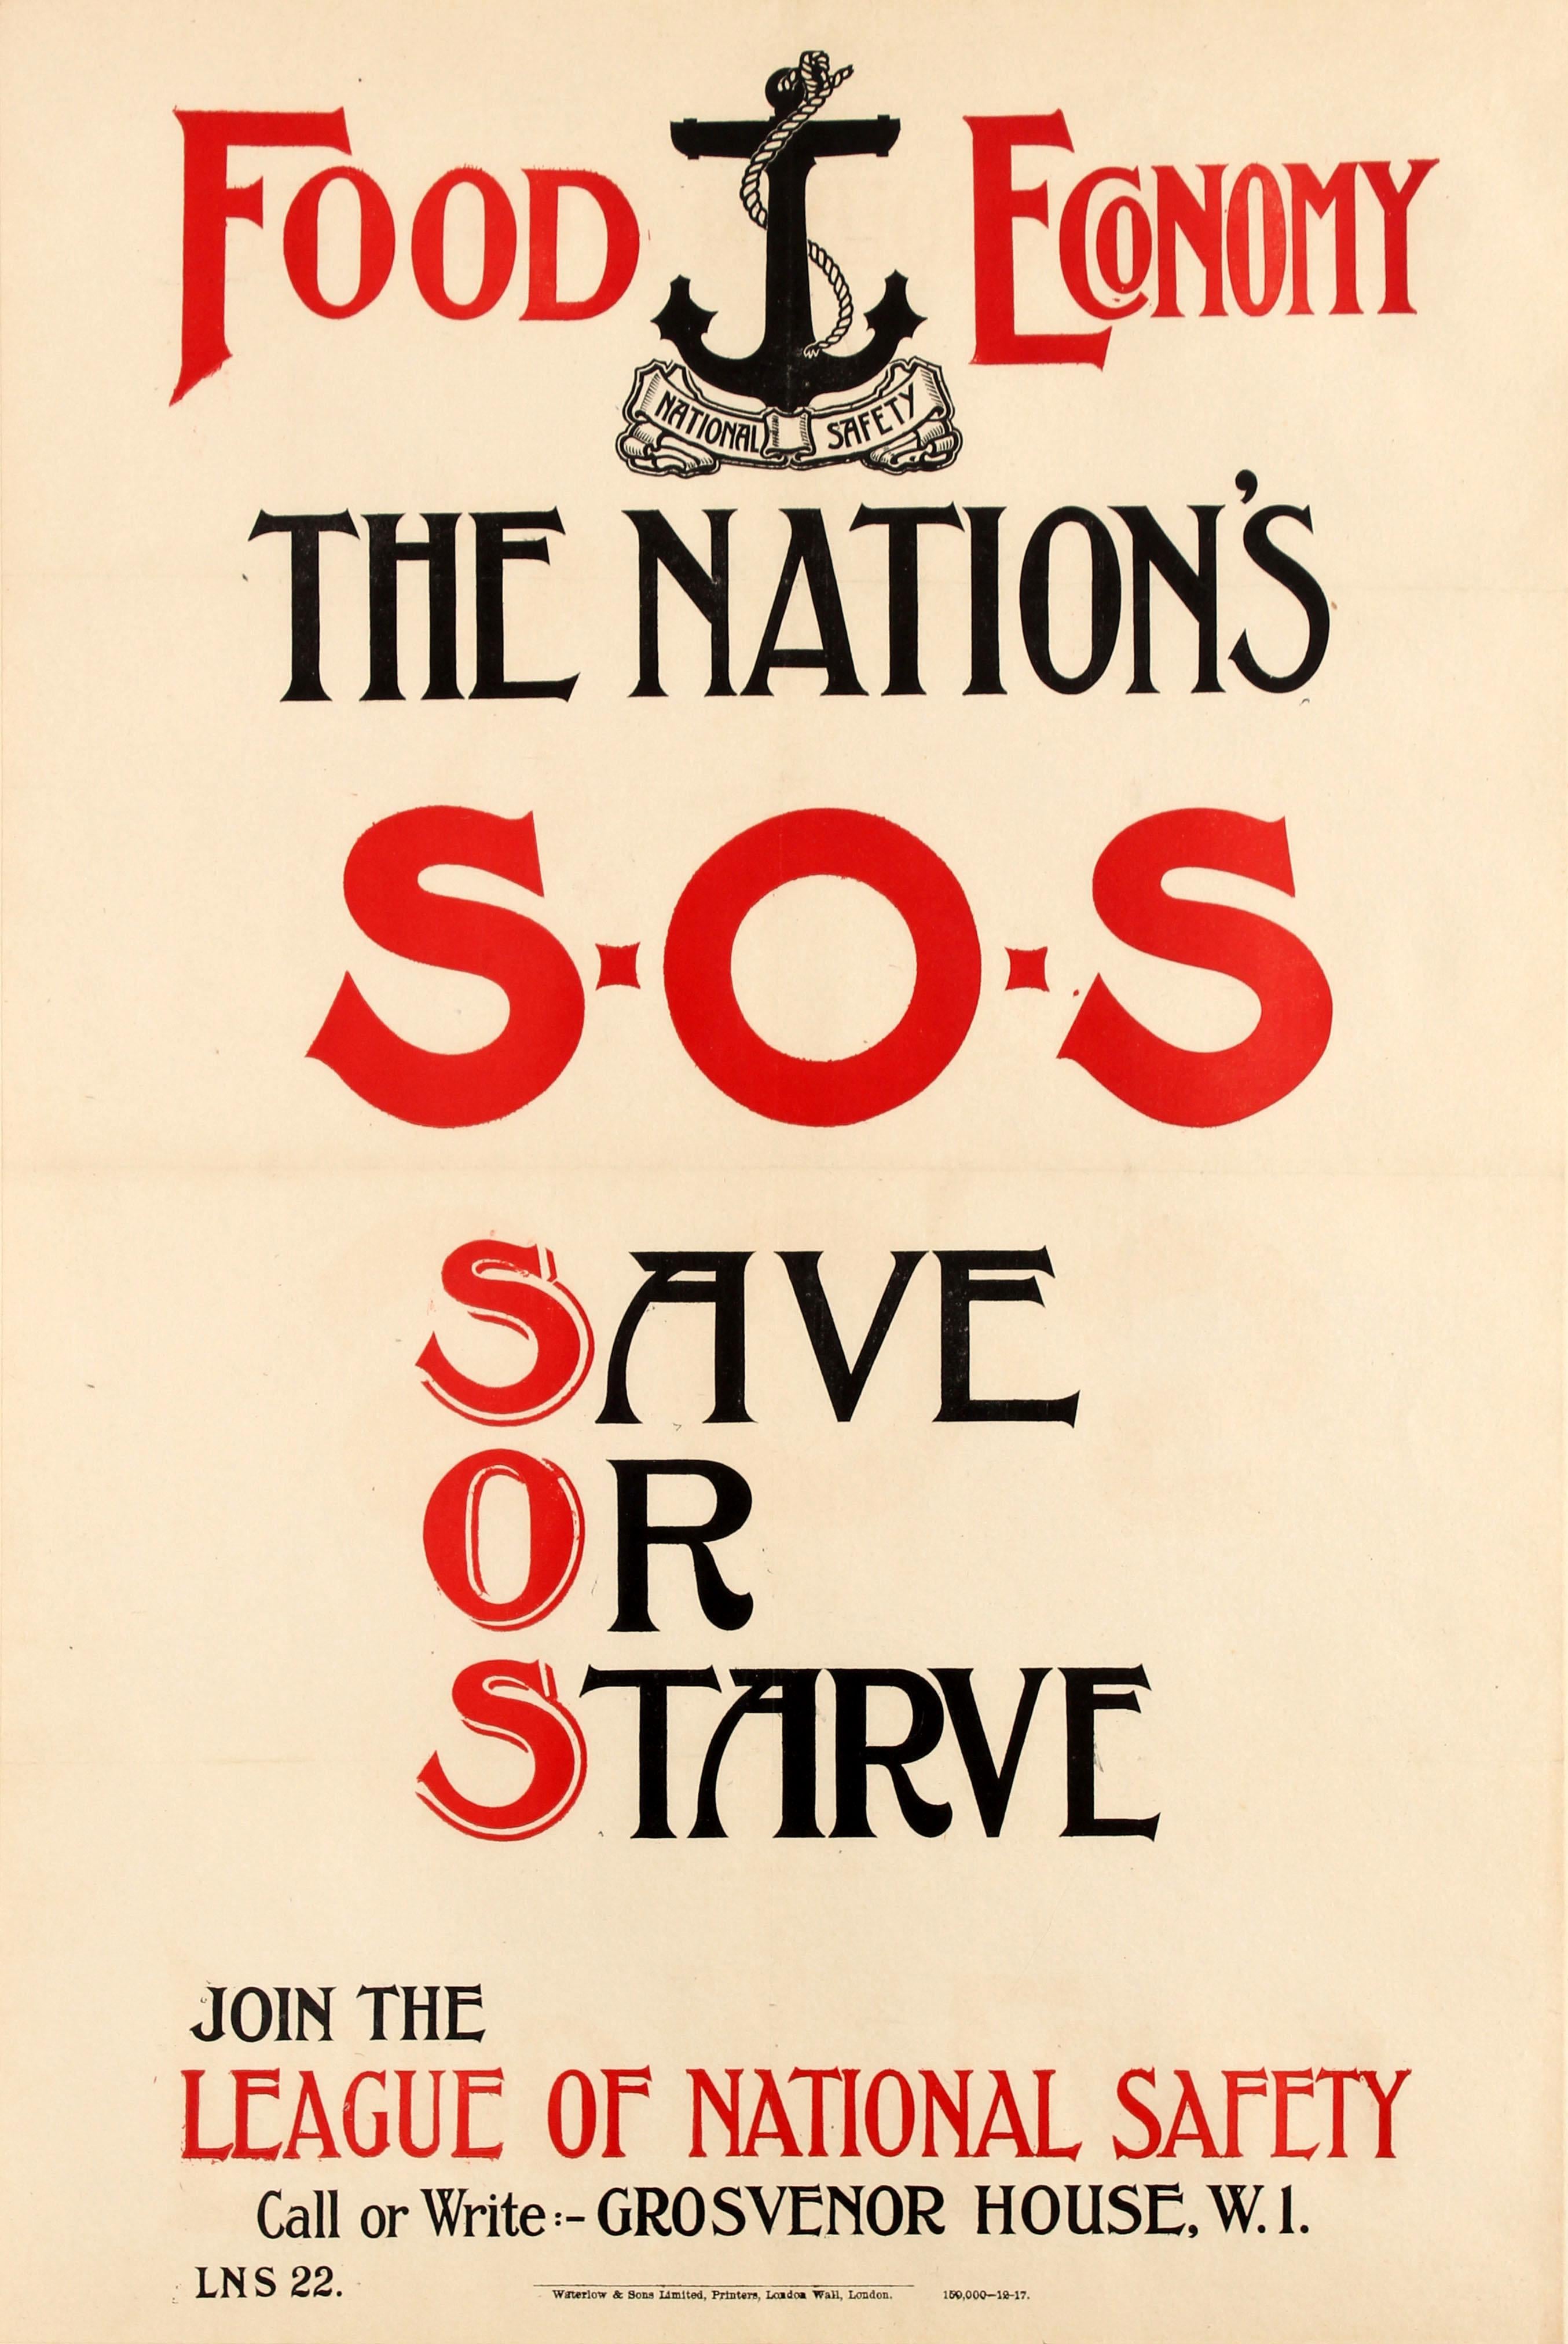 Unknown Print - Original Antique WWI Propaganda Poster Save Or Starve SOS Food Economy Safety